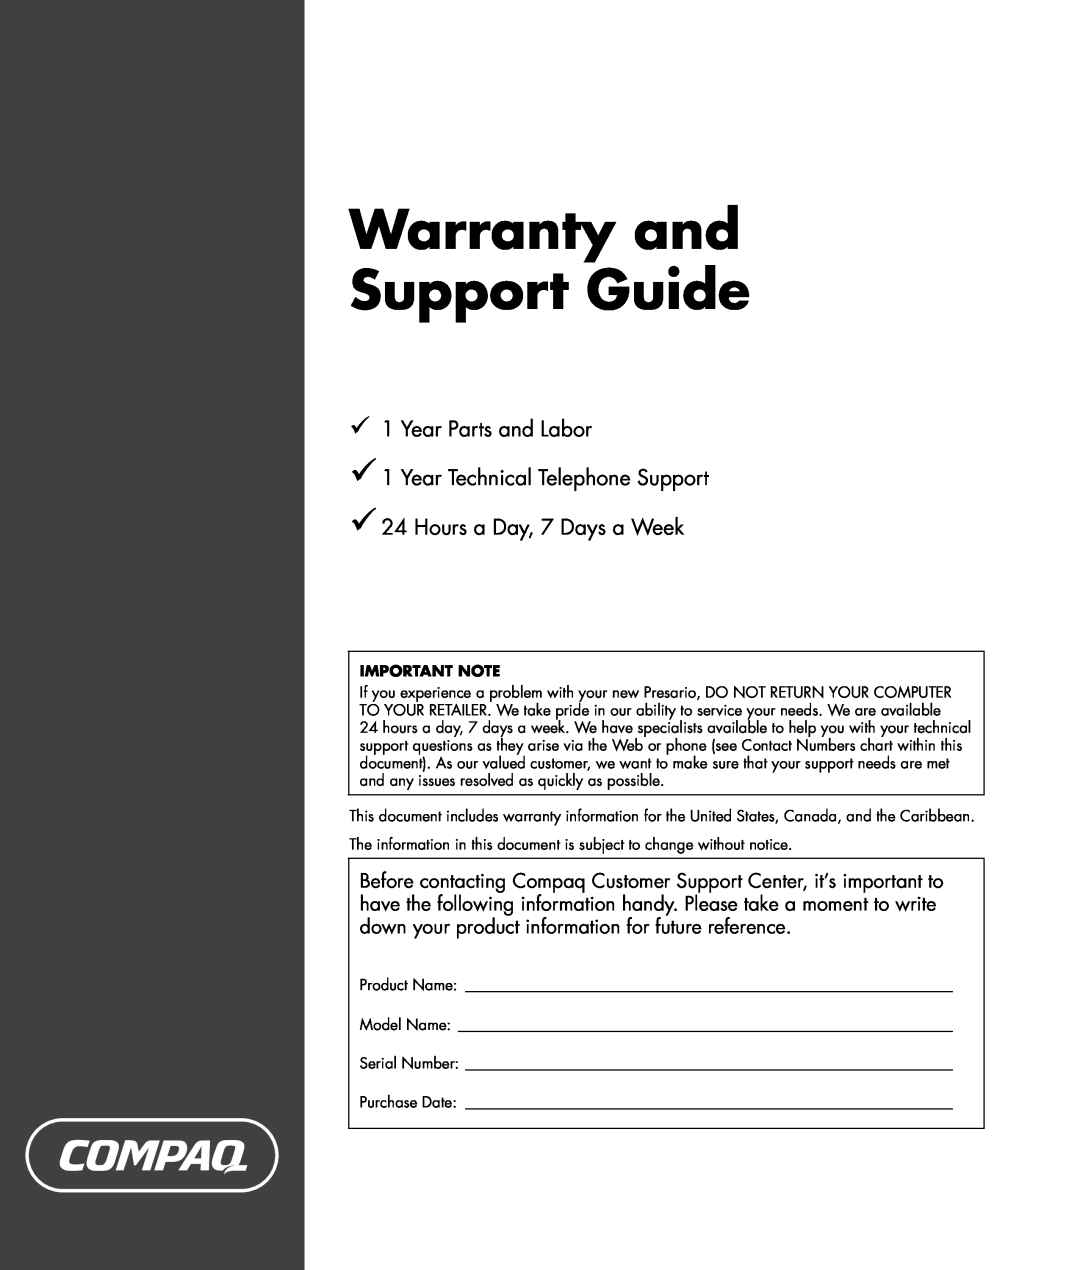 HP SR1222NX, SR1226NX, SR1221RS manual Warranty and Support Guide, Year Parts and Labor 1 Year Technical Telephone Support 